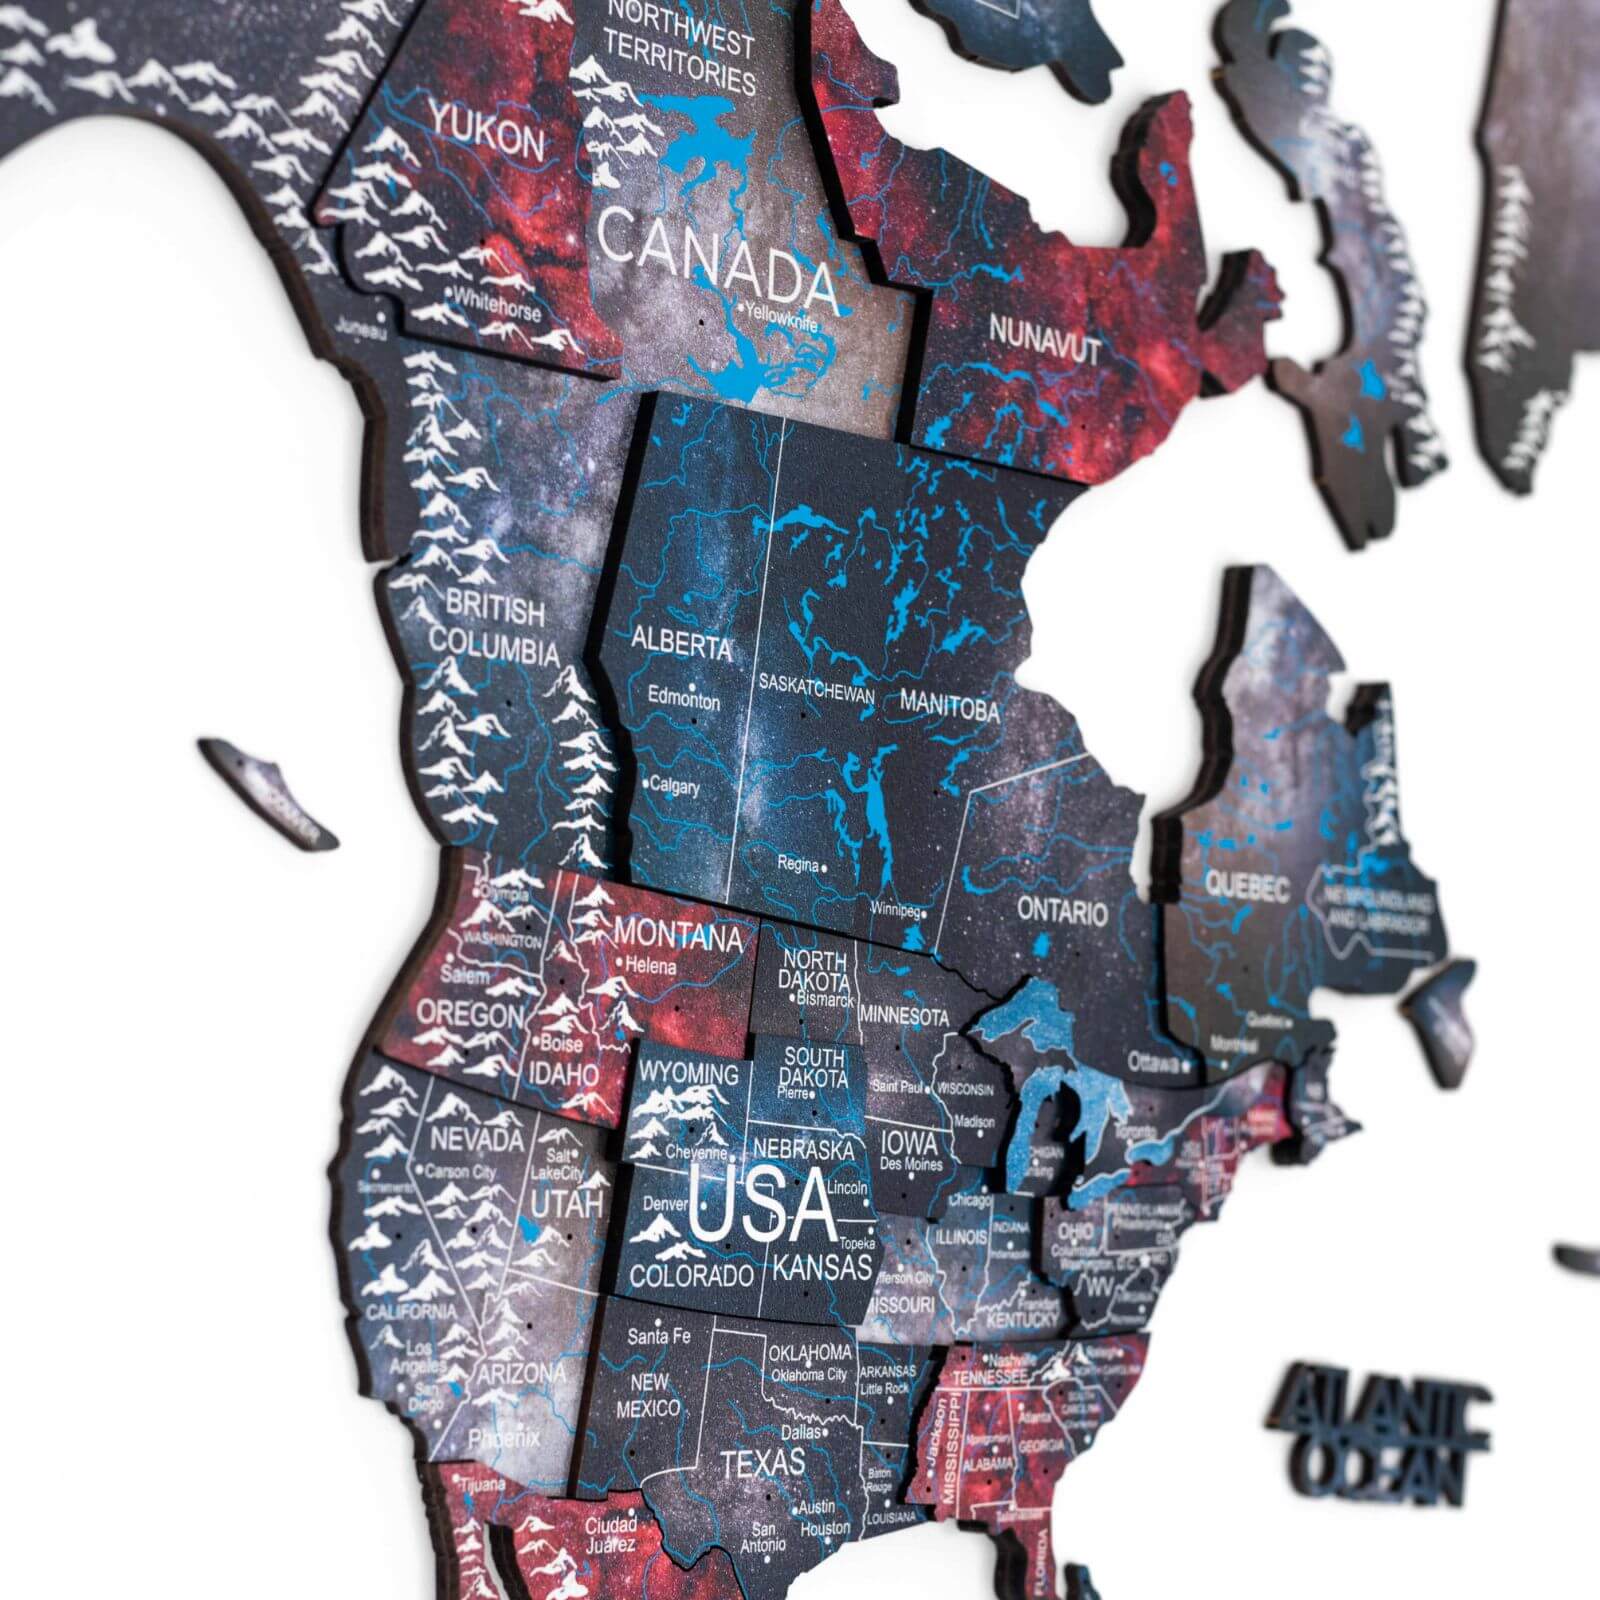 3D Wooden Map of the US  US Wall Map – Wooden World Map